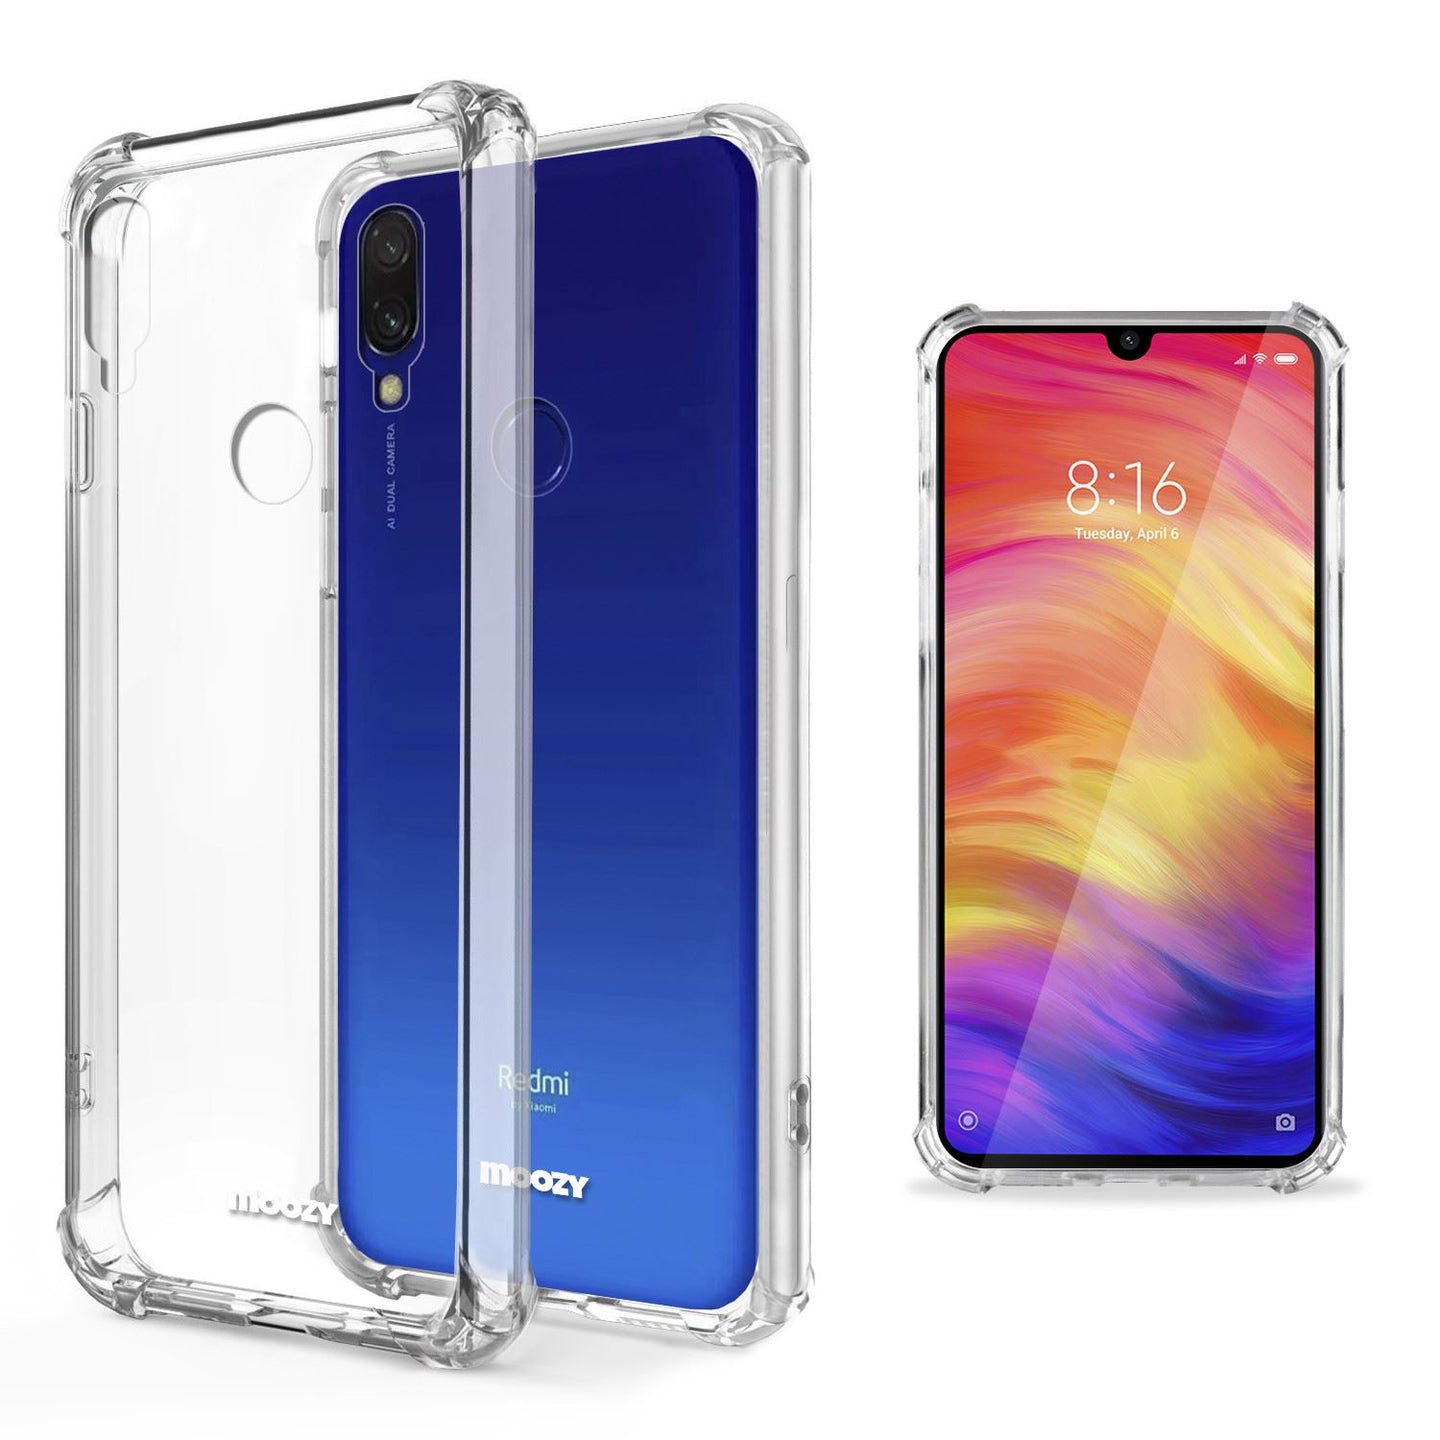 Moozy Shock Proof Silicone Case for Xiaomi Redmi 7 - Transparent Crystal Clear Phone Case Soft TPU Cover